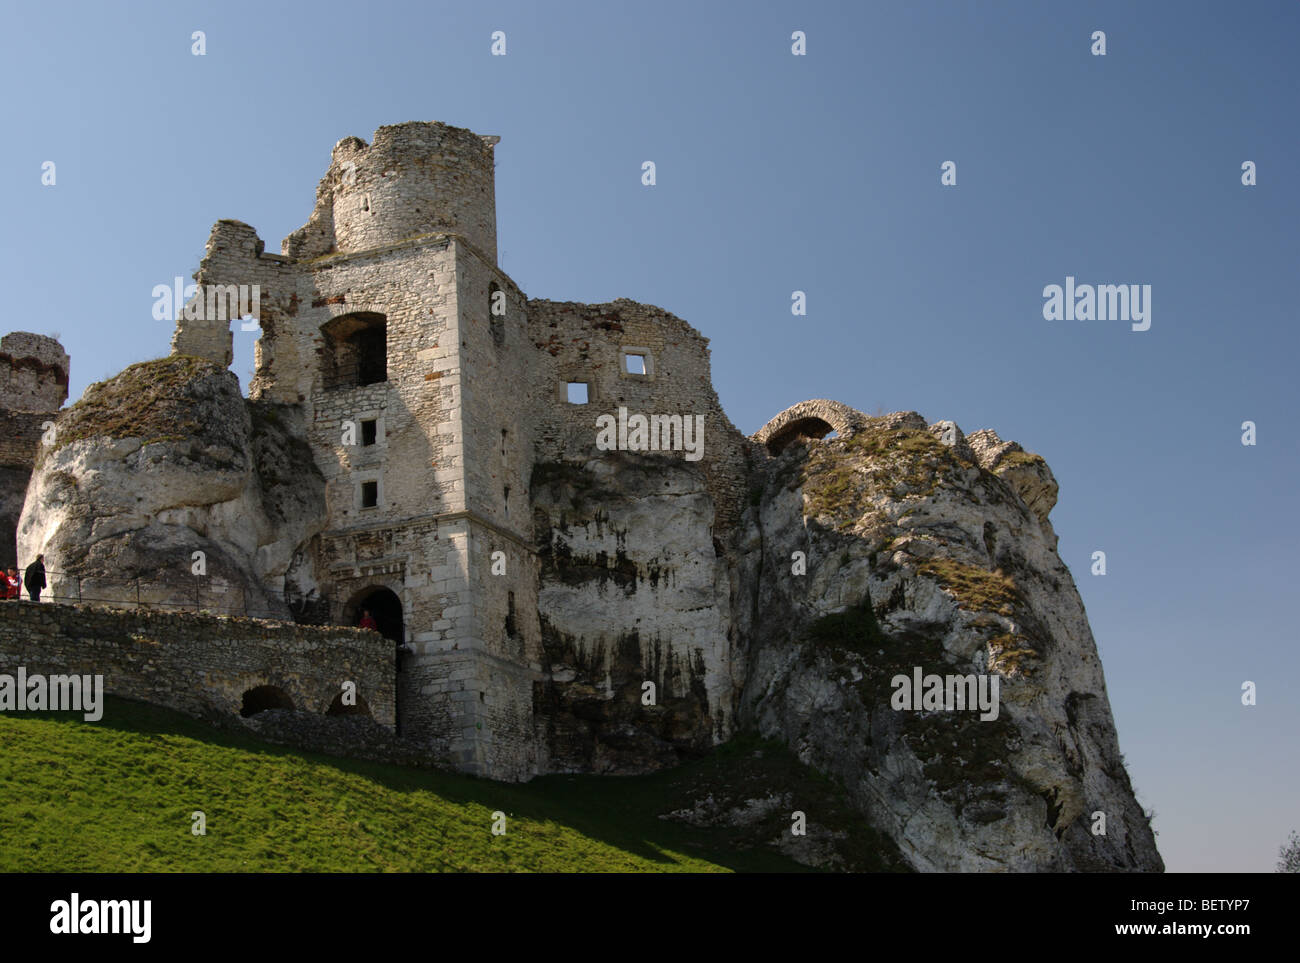 Ruins of castle from middle ages Ogrodzieniec, Poland Stock Photo